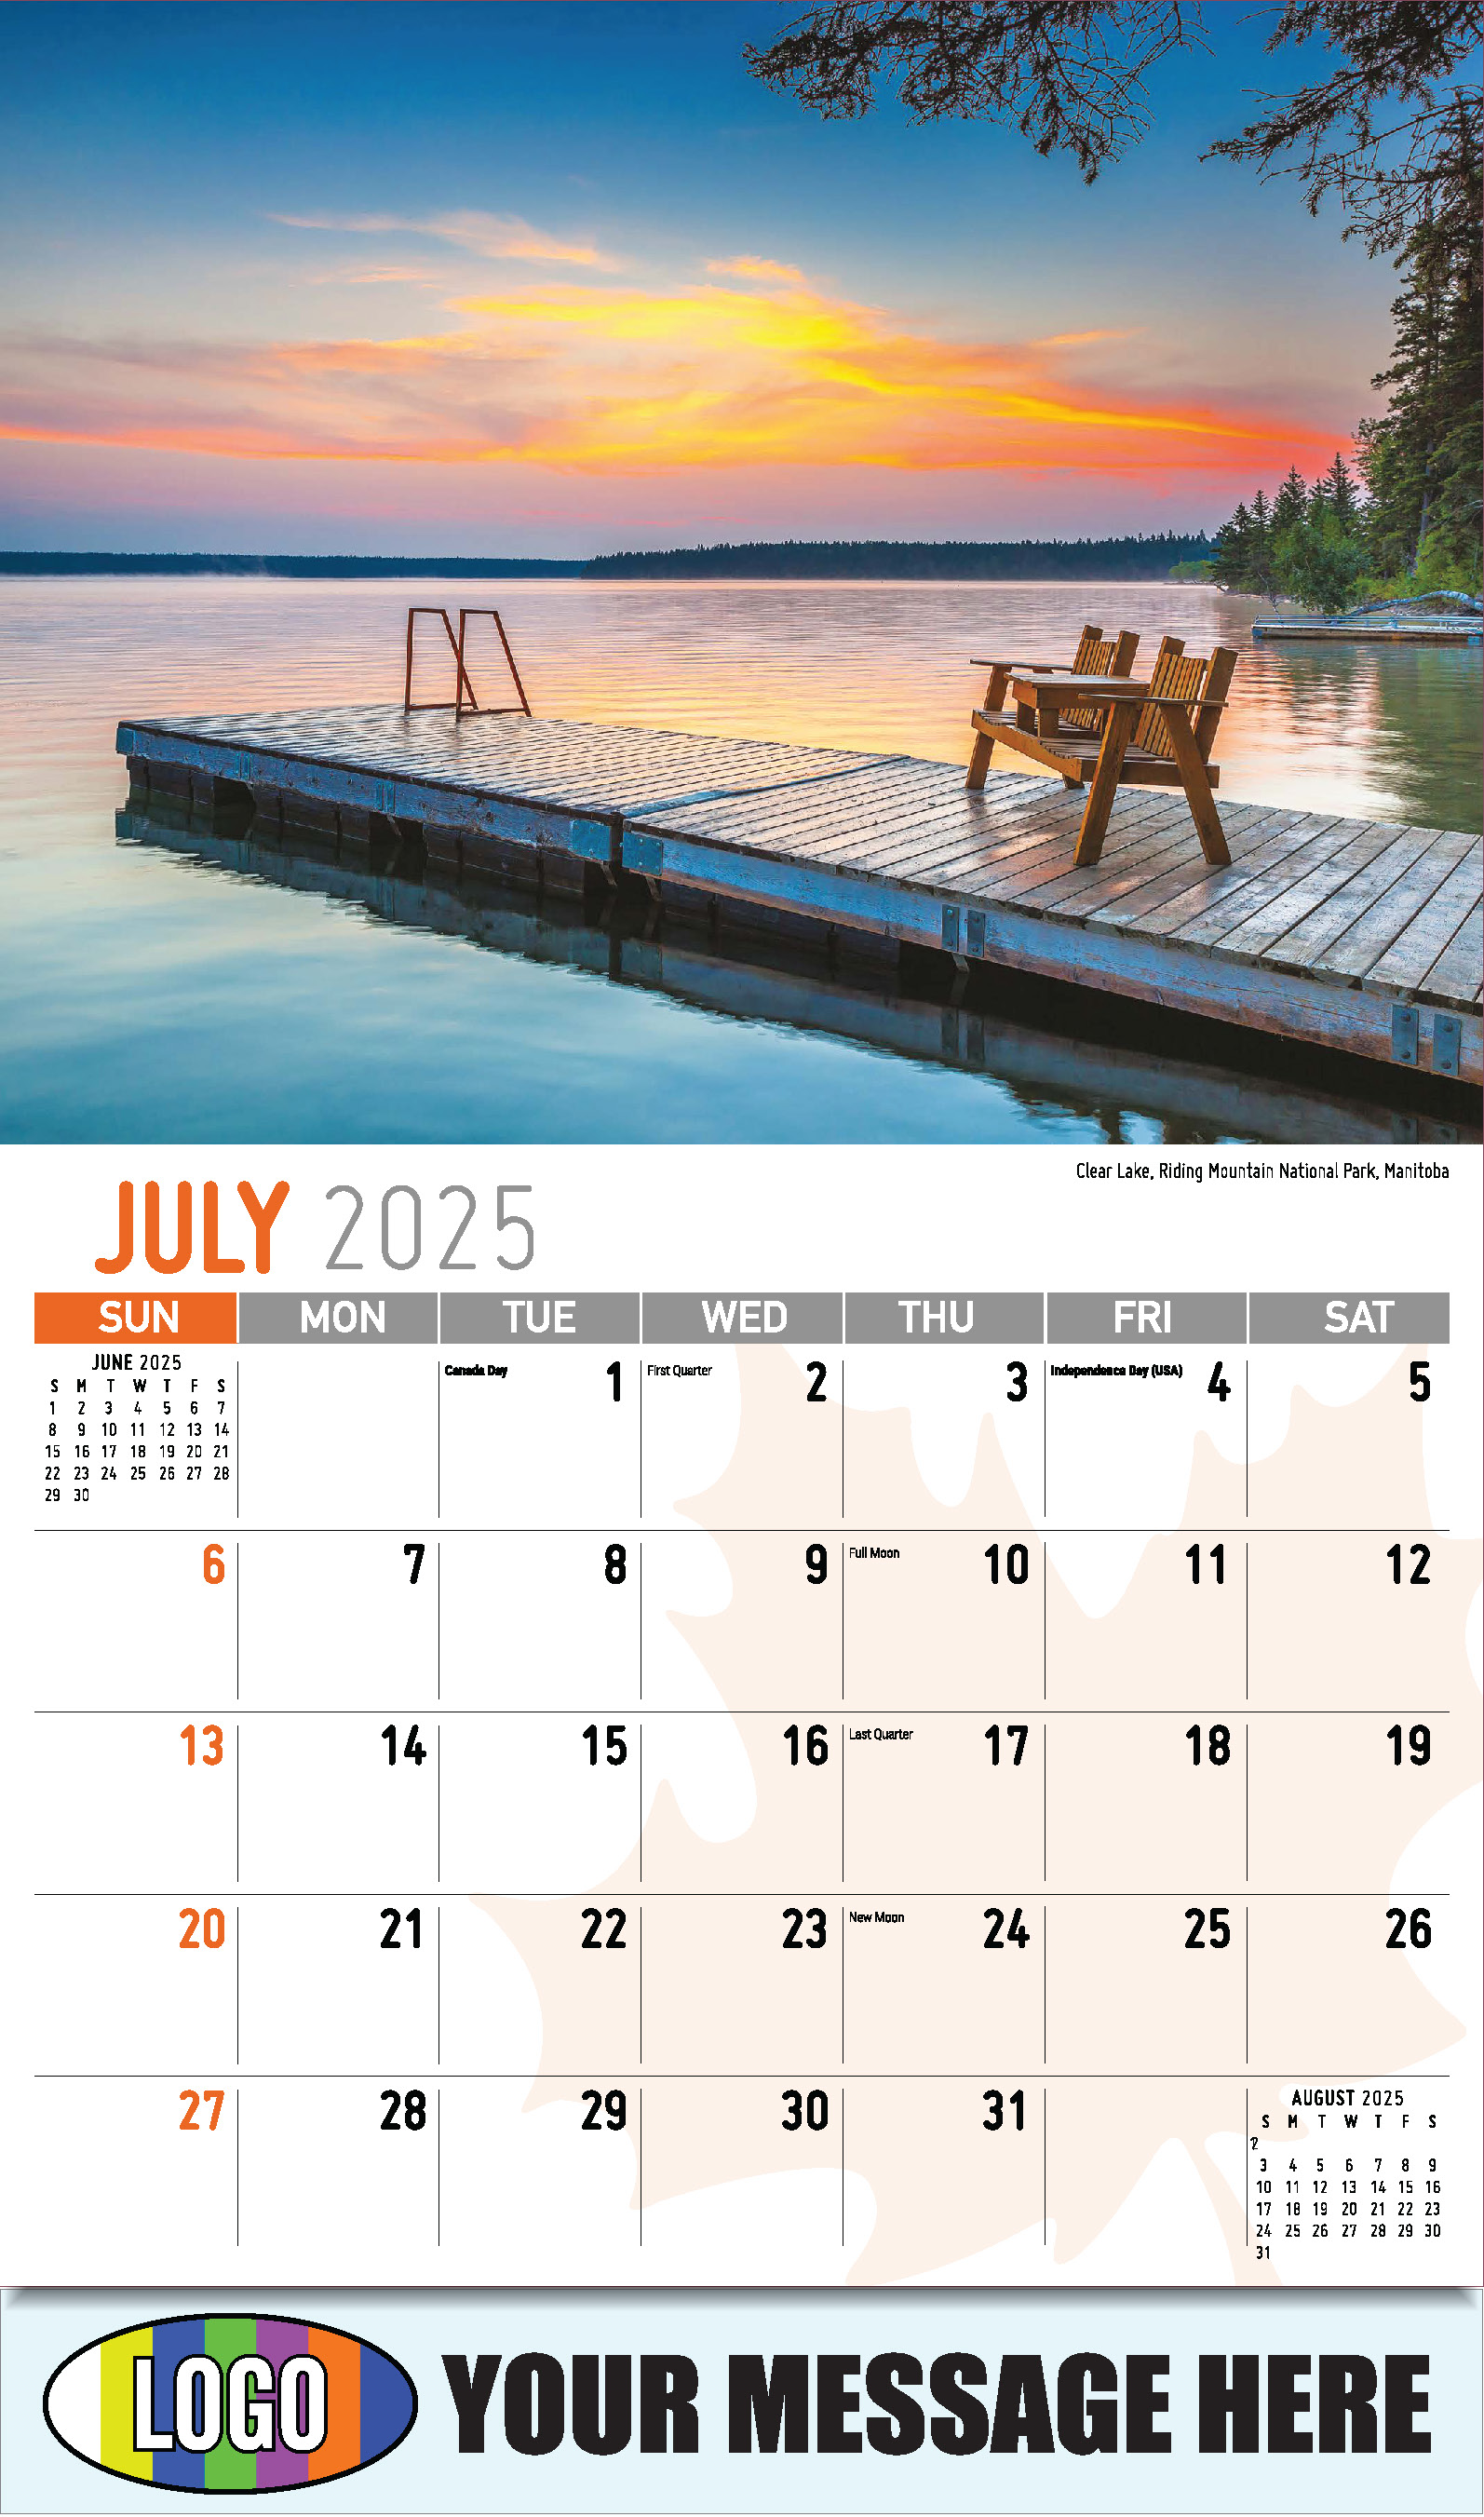 Scenes of Canada 2025 Business Promotion Wall Calendar - July